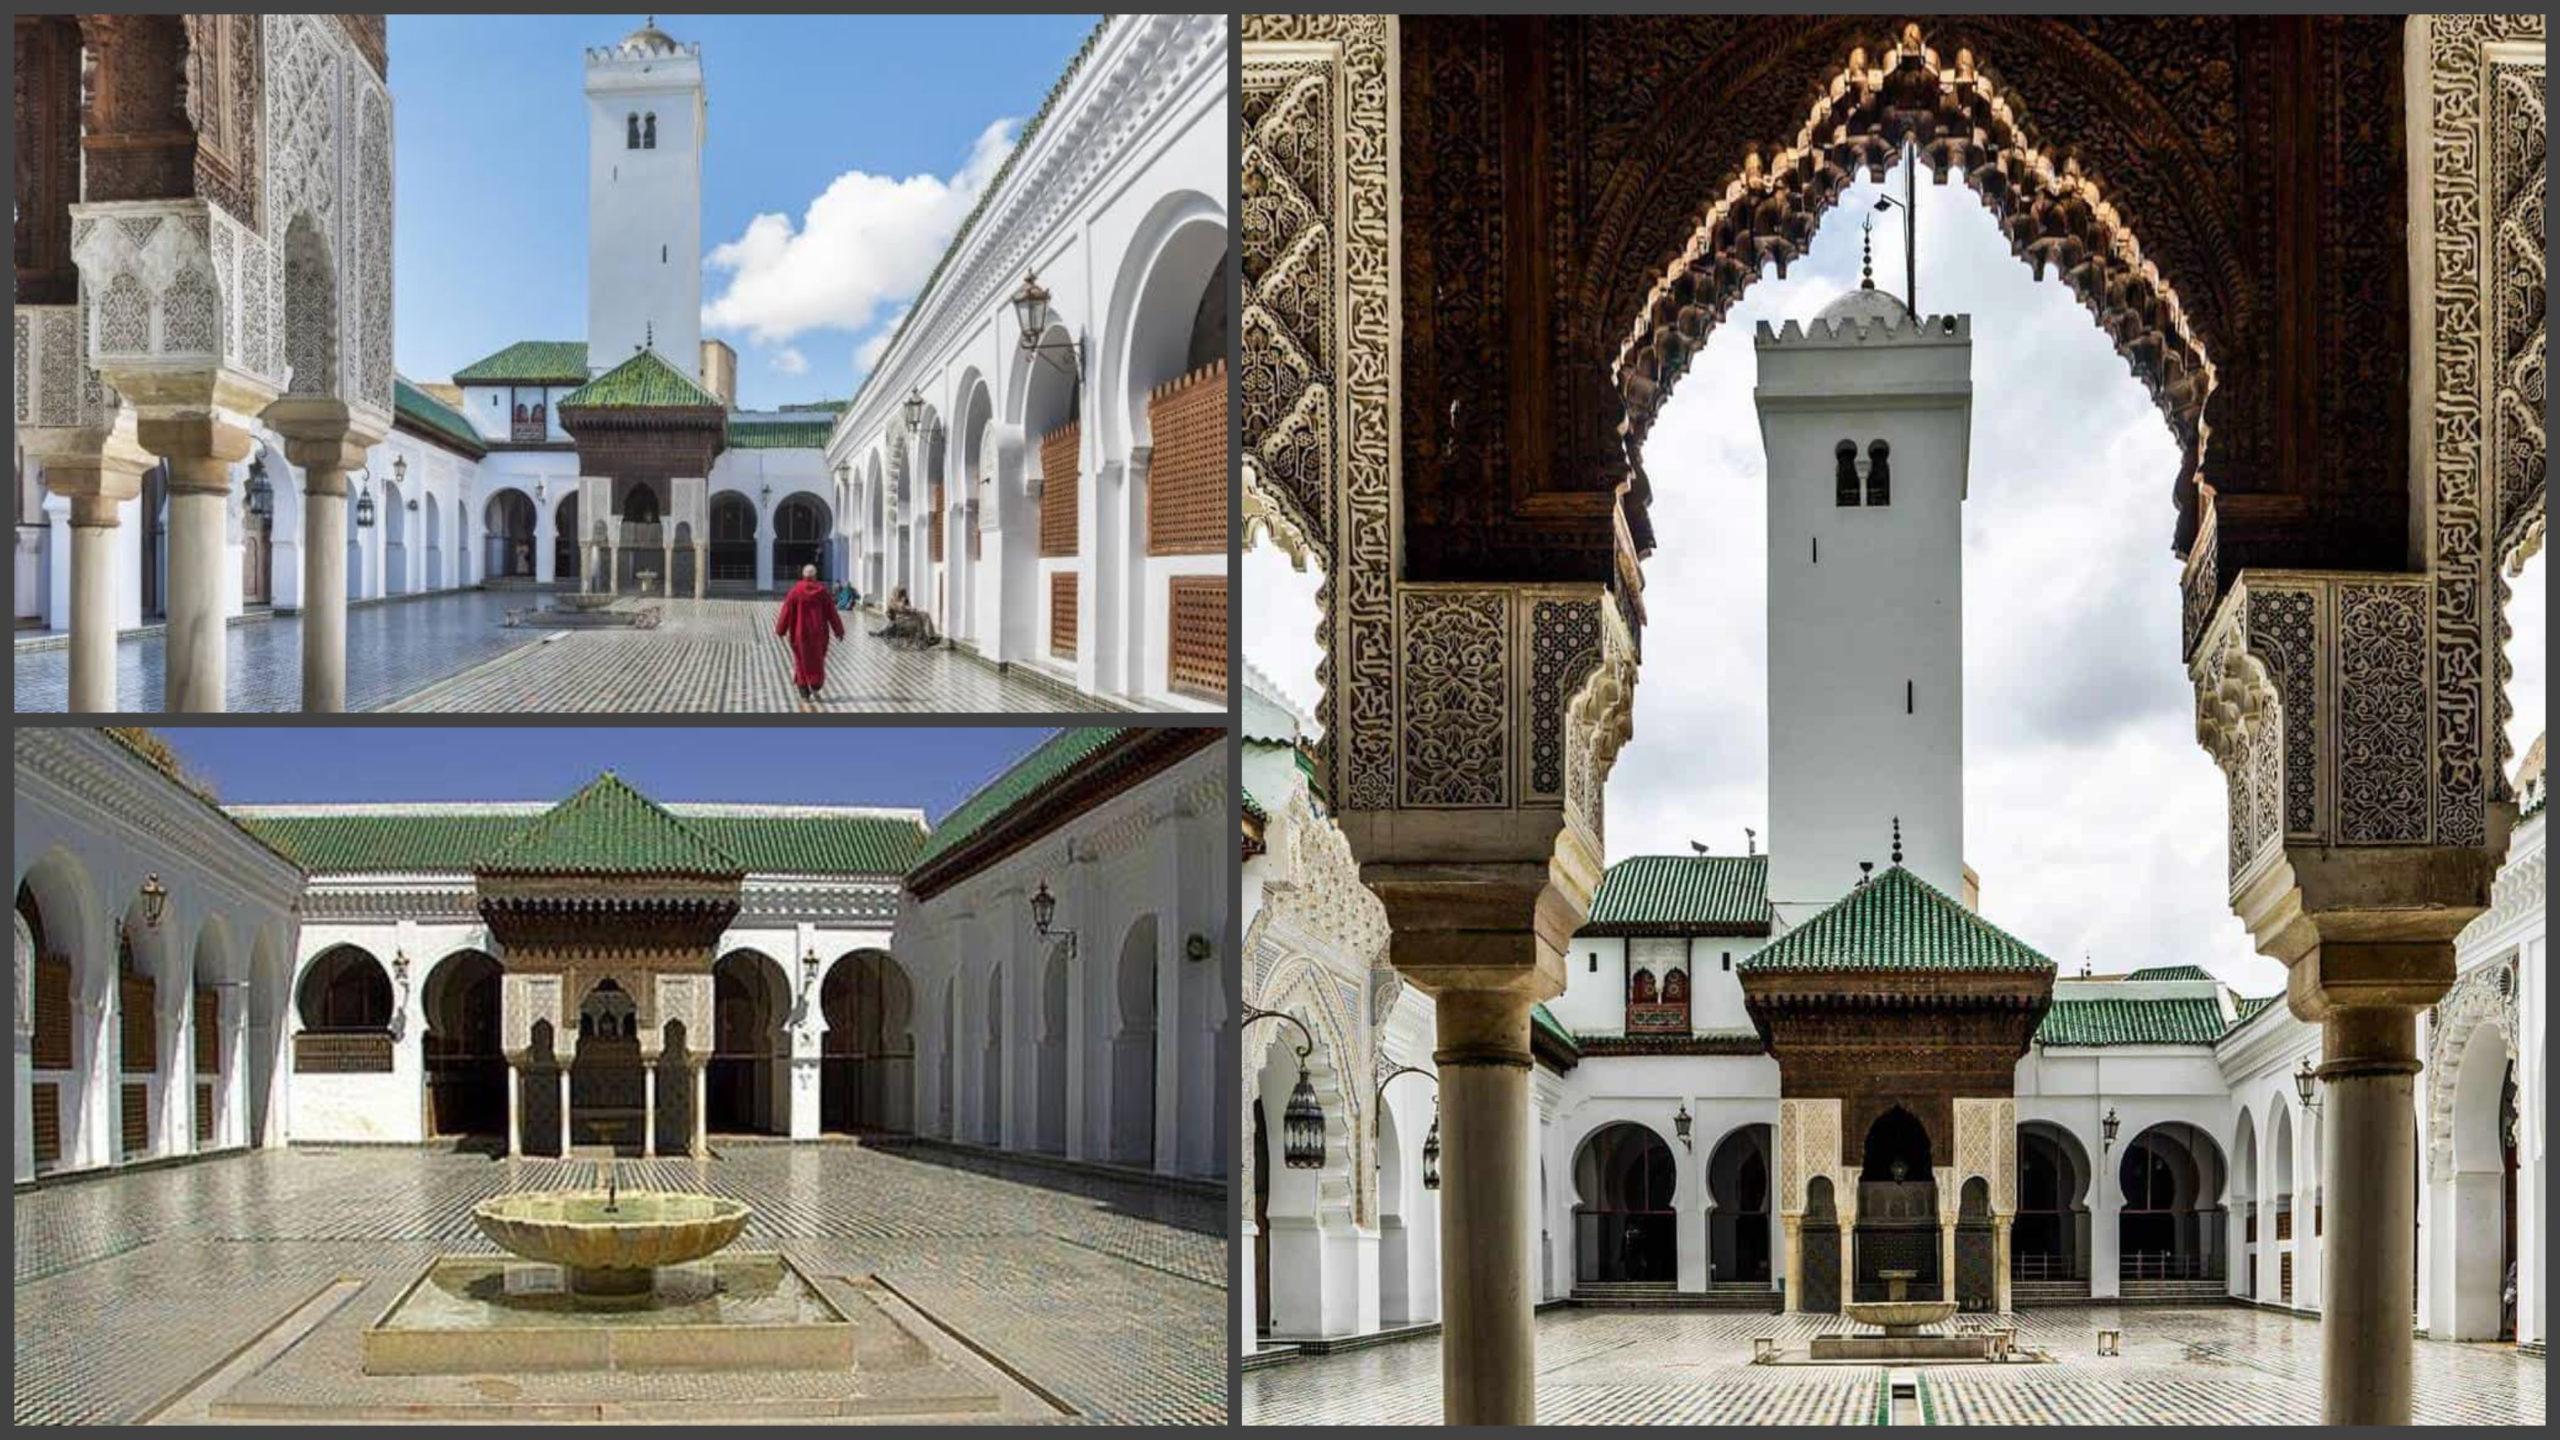 Al Quaraouiyine University, Morocco, the oldest in the world [founded in 859 AD]